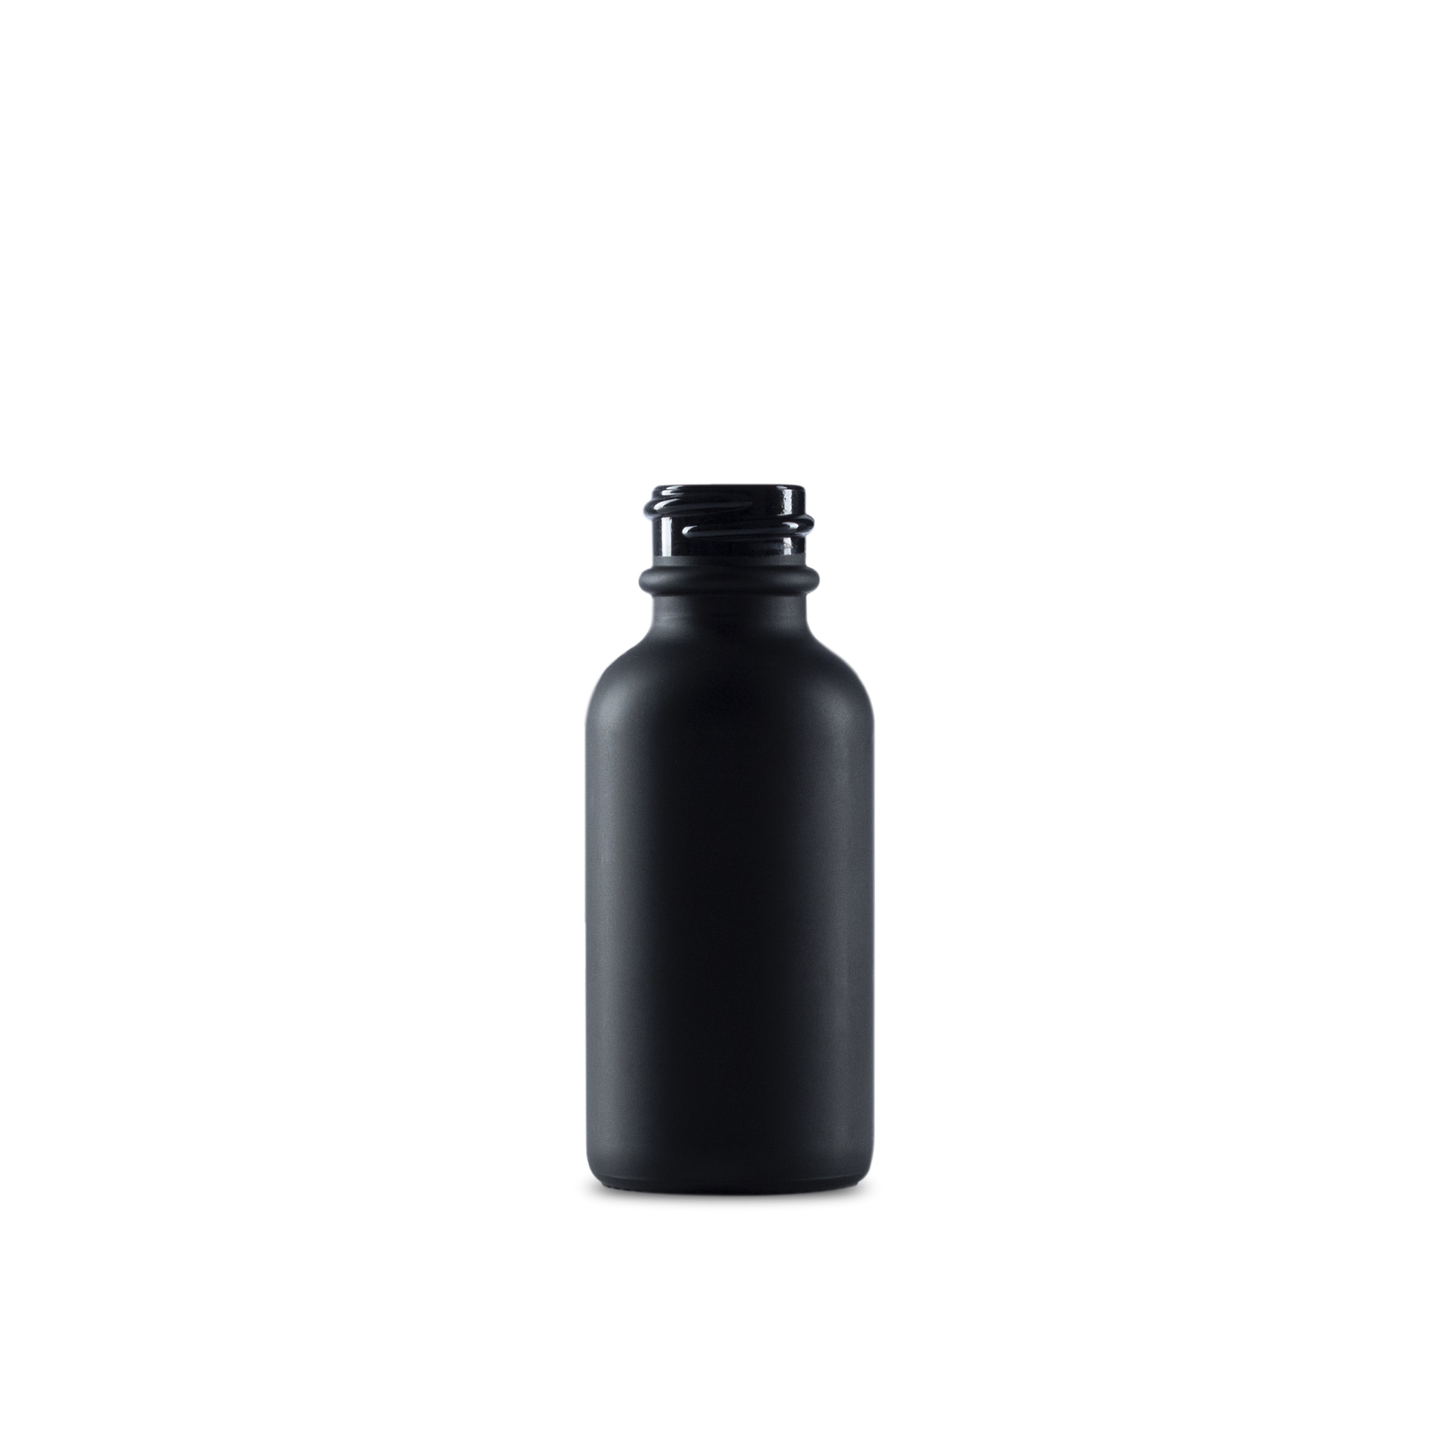 1oz black frosted bottles are made from a type of glass called borosilicate and are the perfect size for packaging a variety of liquids.